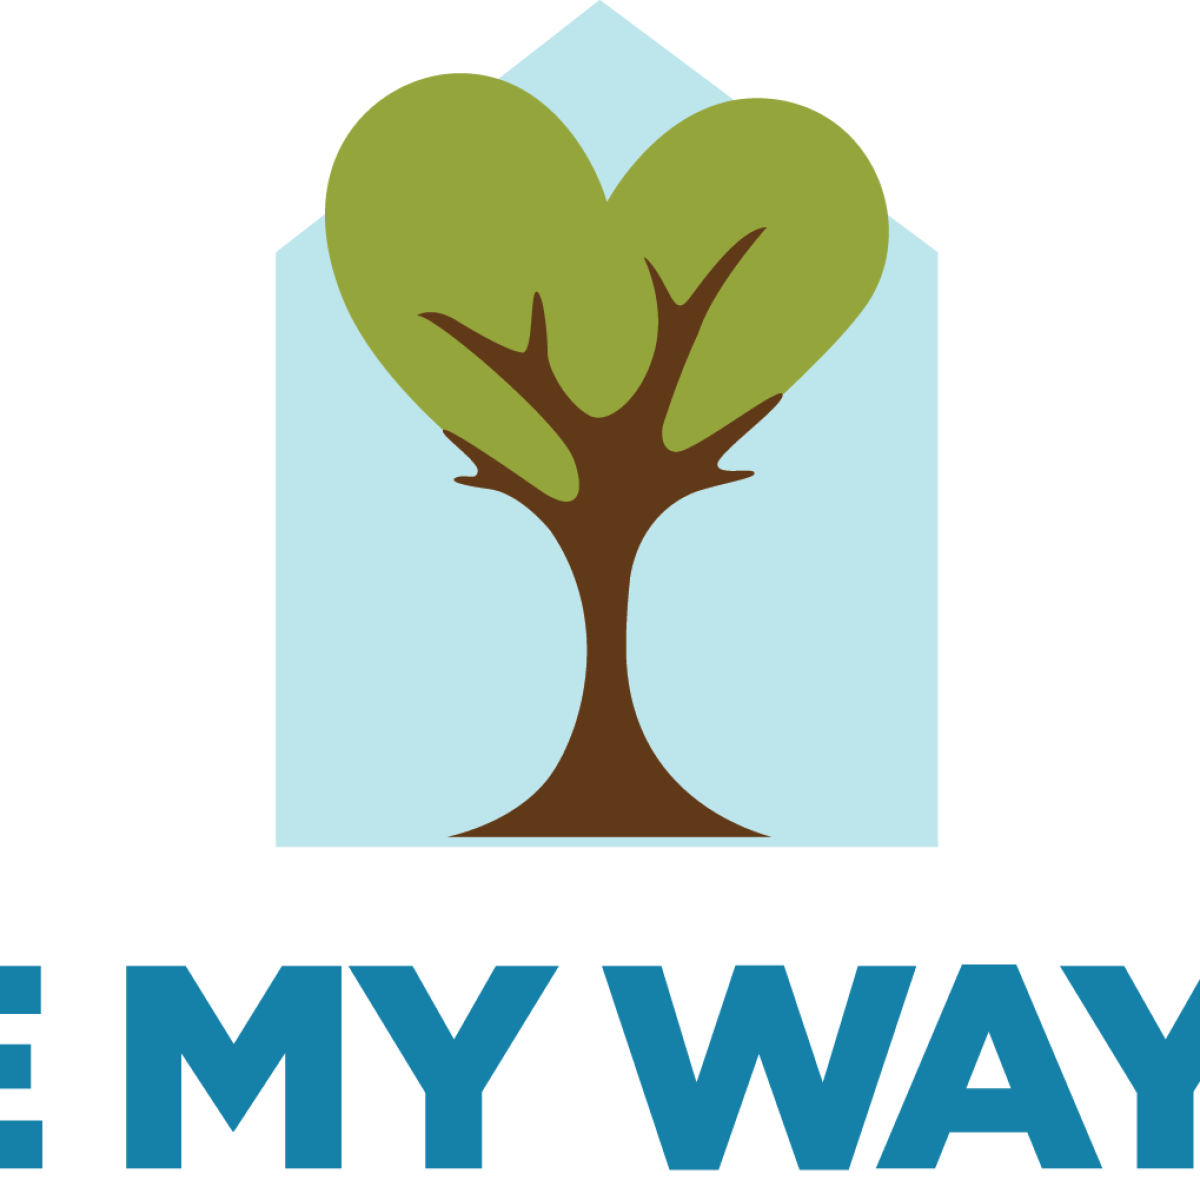 AARP and the State of North Carolina collaborate to help people “Age My Way”